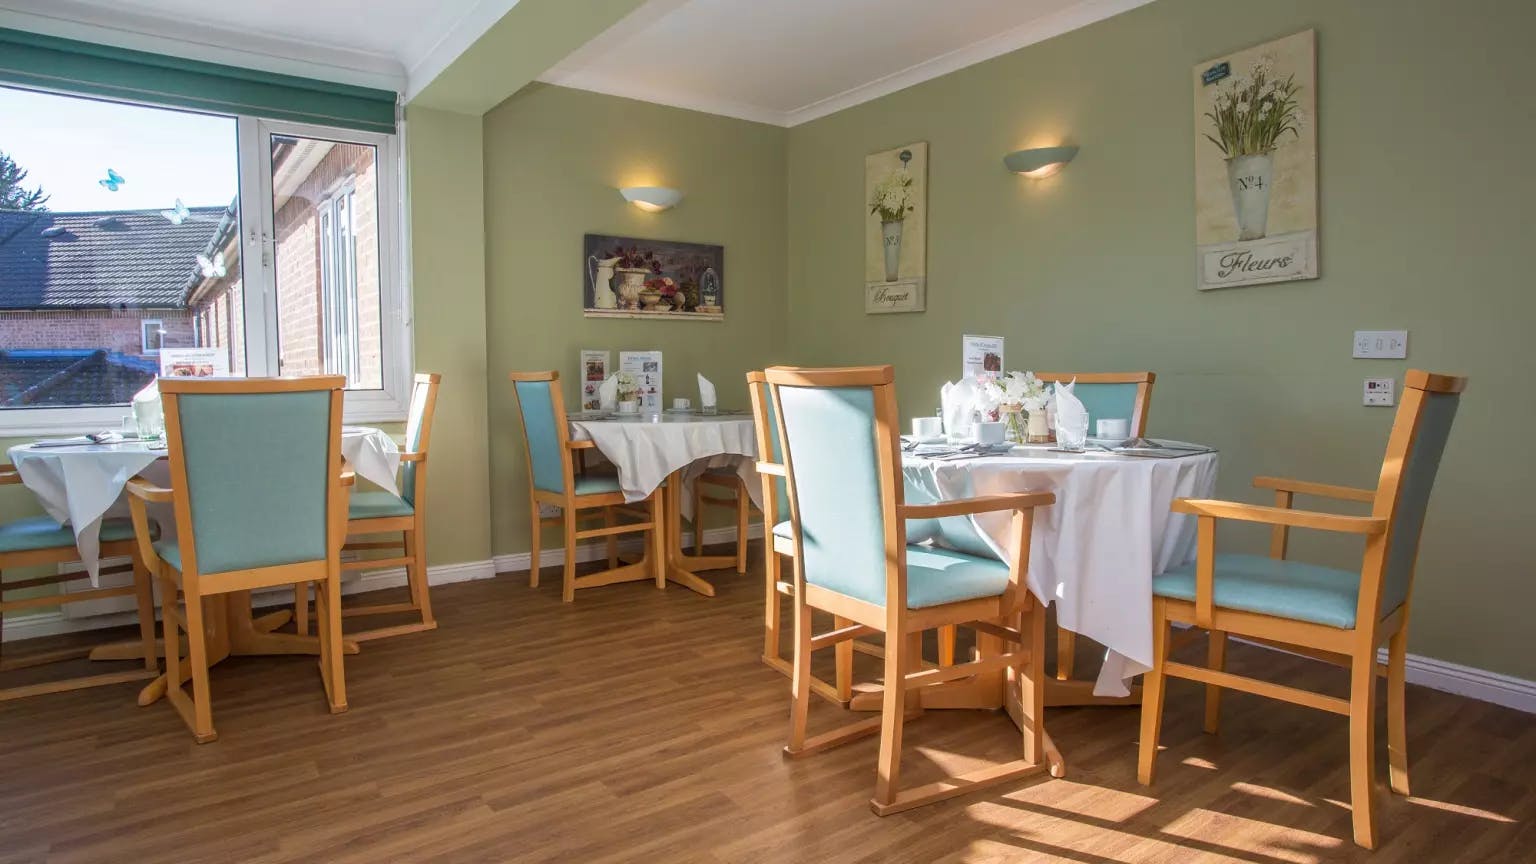 Dining area of Courtland Lodge care home in Watford, Hertfordshire